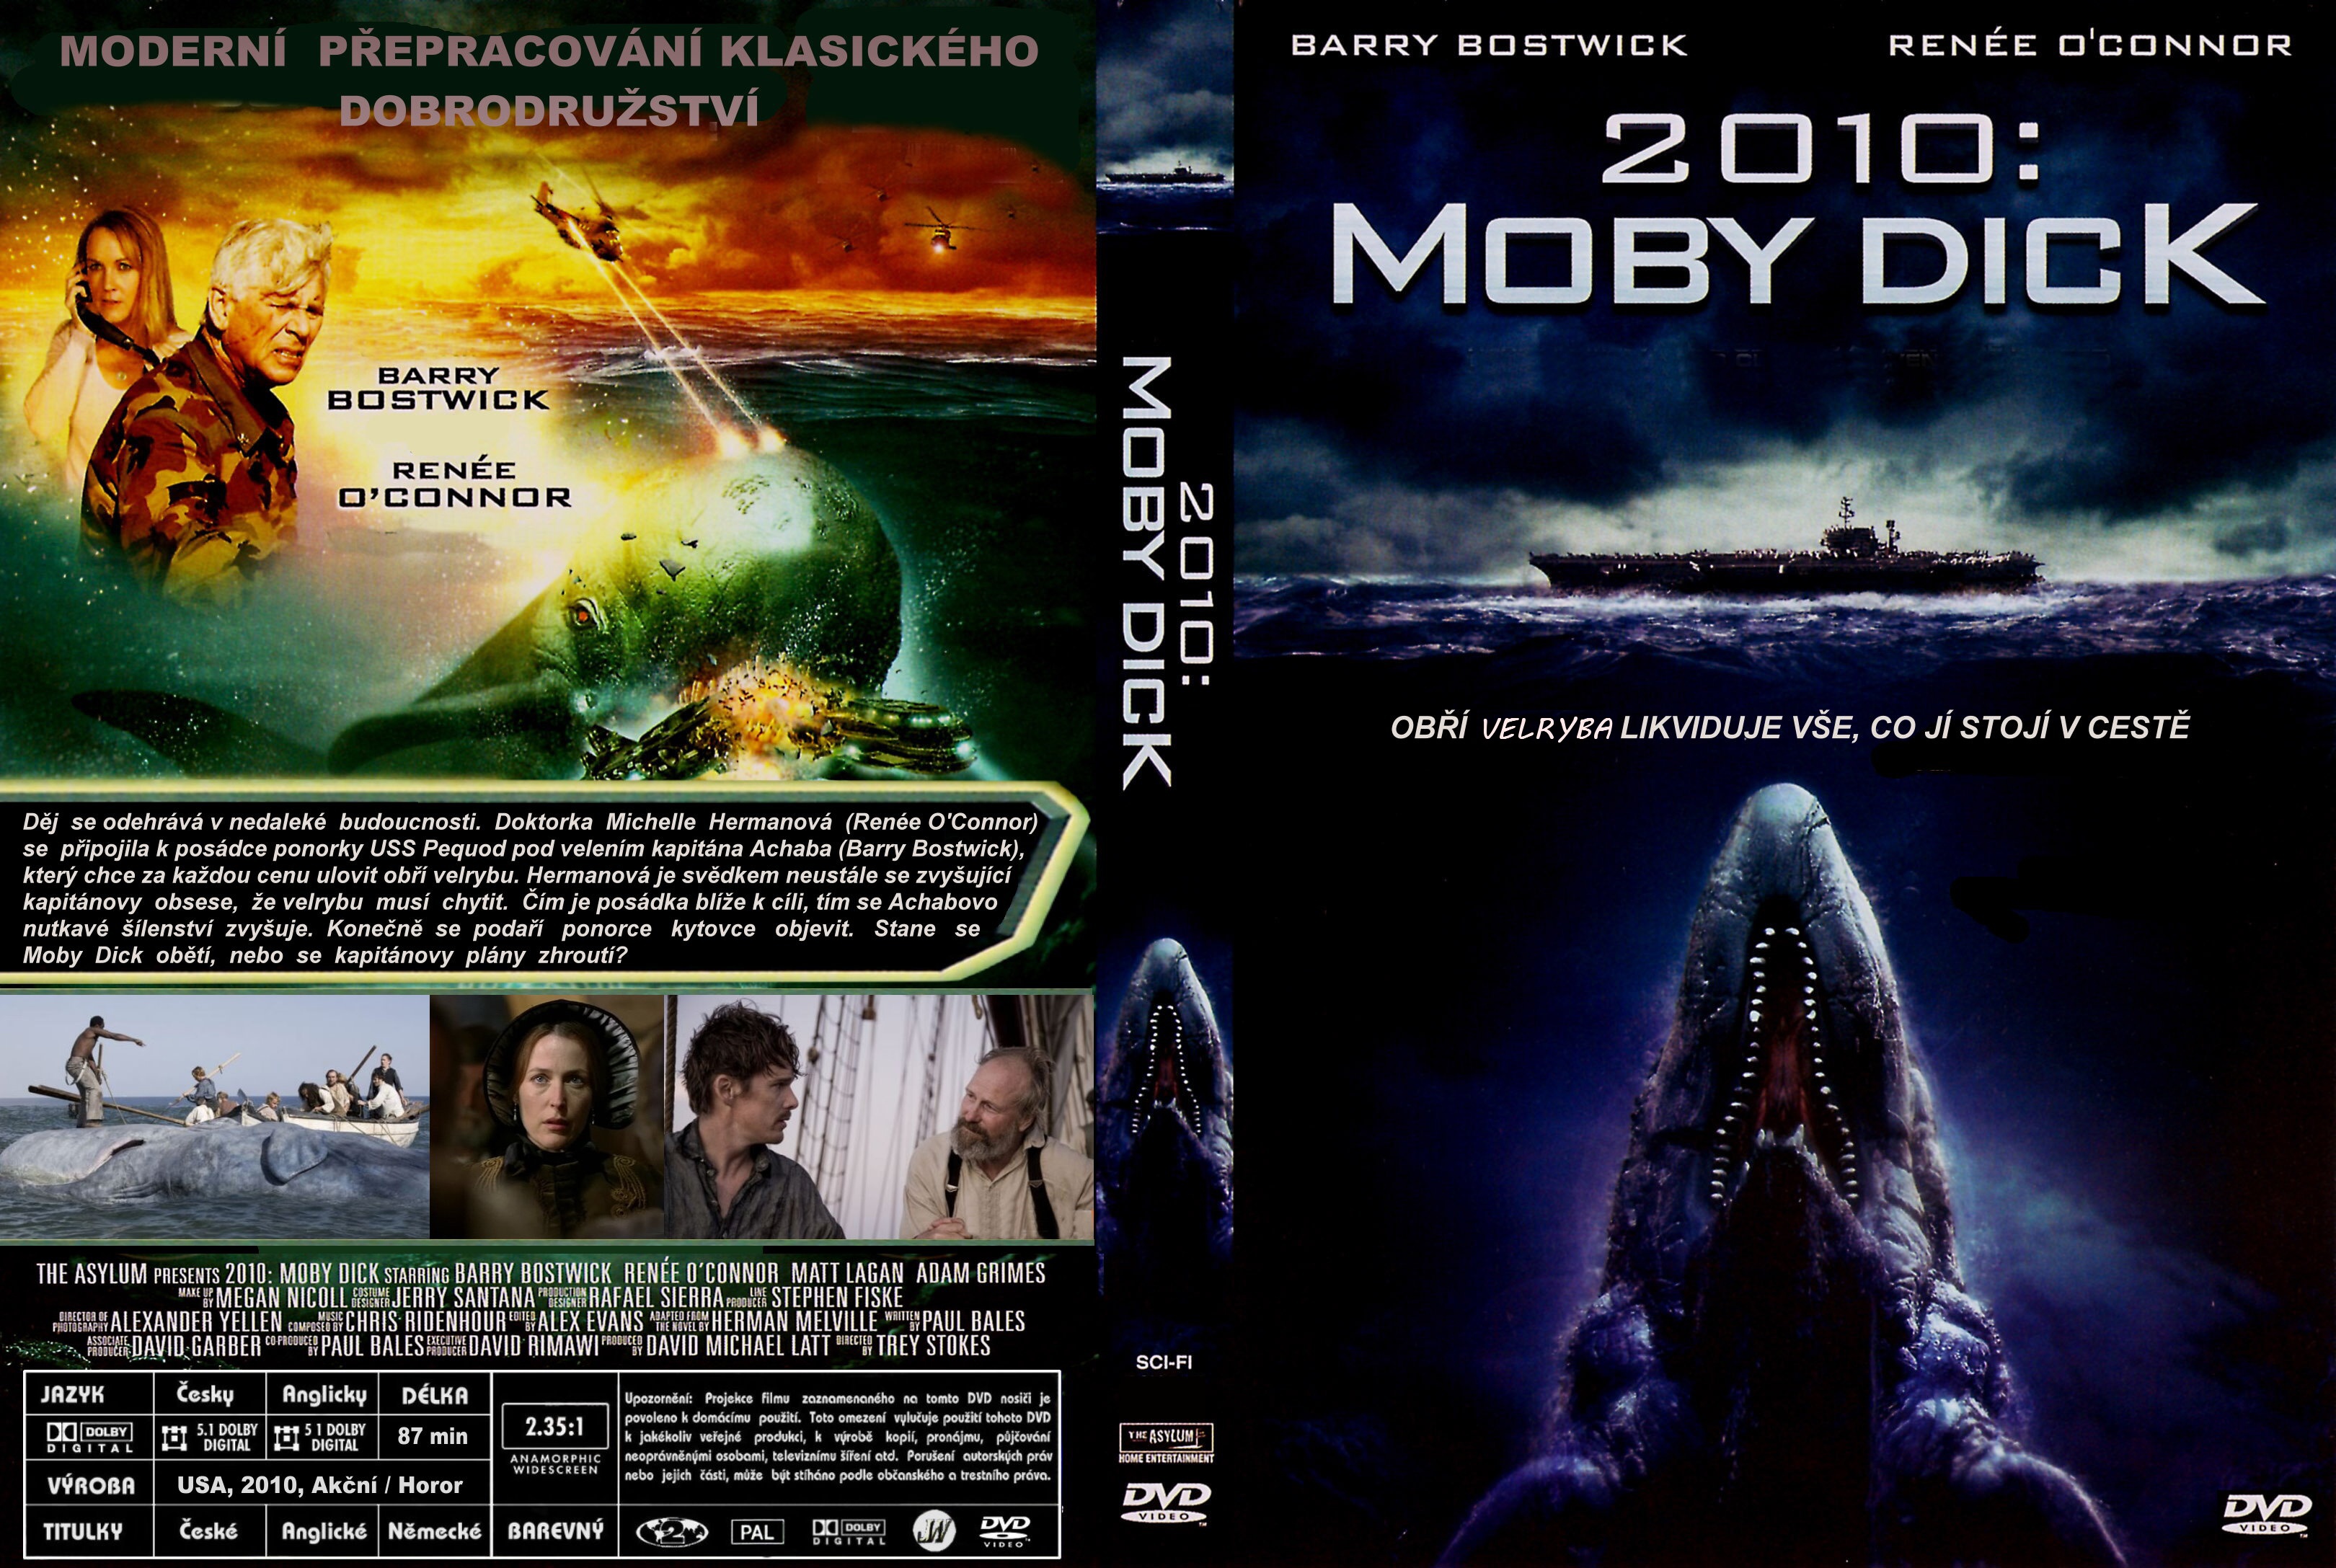 Publication date moby dick